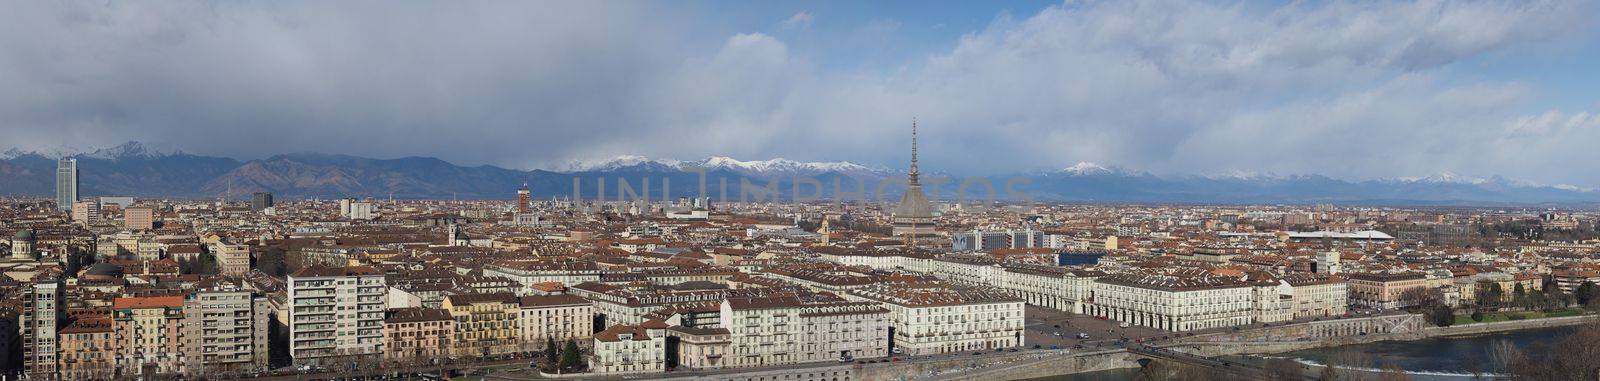 TURIN, ITALY - CIRCA FEBRUARY 2020: Wide panoramic aerial view of the city of Turin seen from the hill